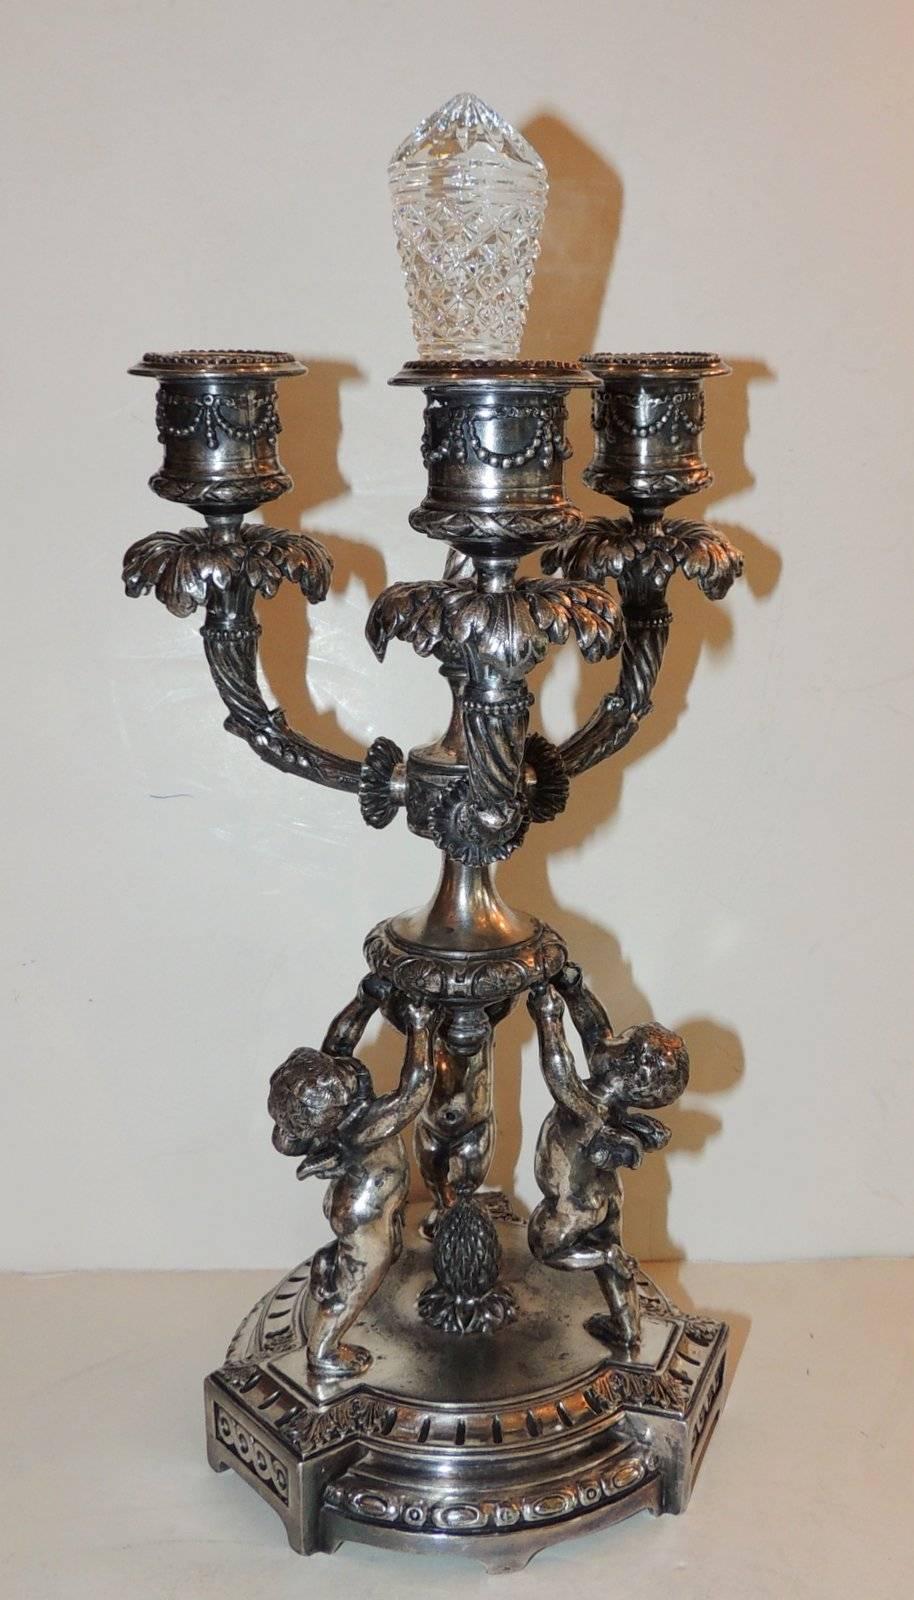 Wonderful pair of pairpoint silvered bronze trio cherub candelabras with wonderful engraved details, three arms and delicate cut crystal centre.

Measures: 12.5